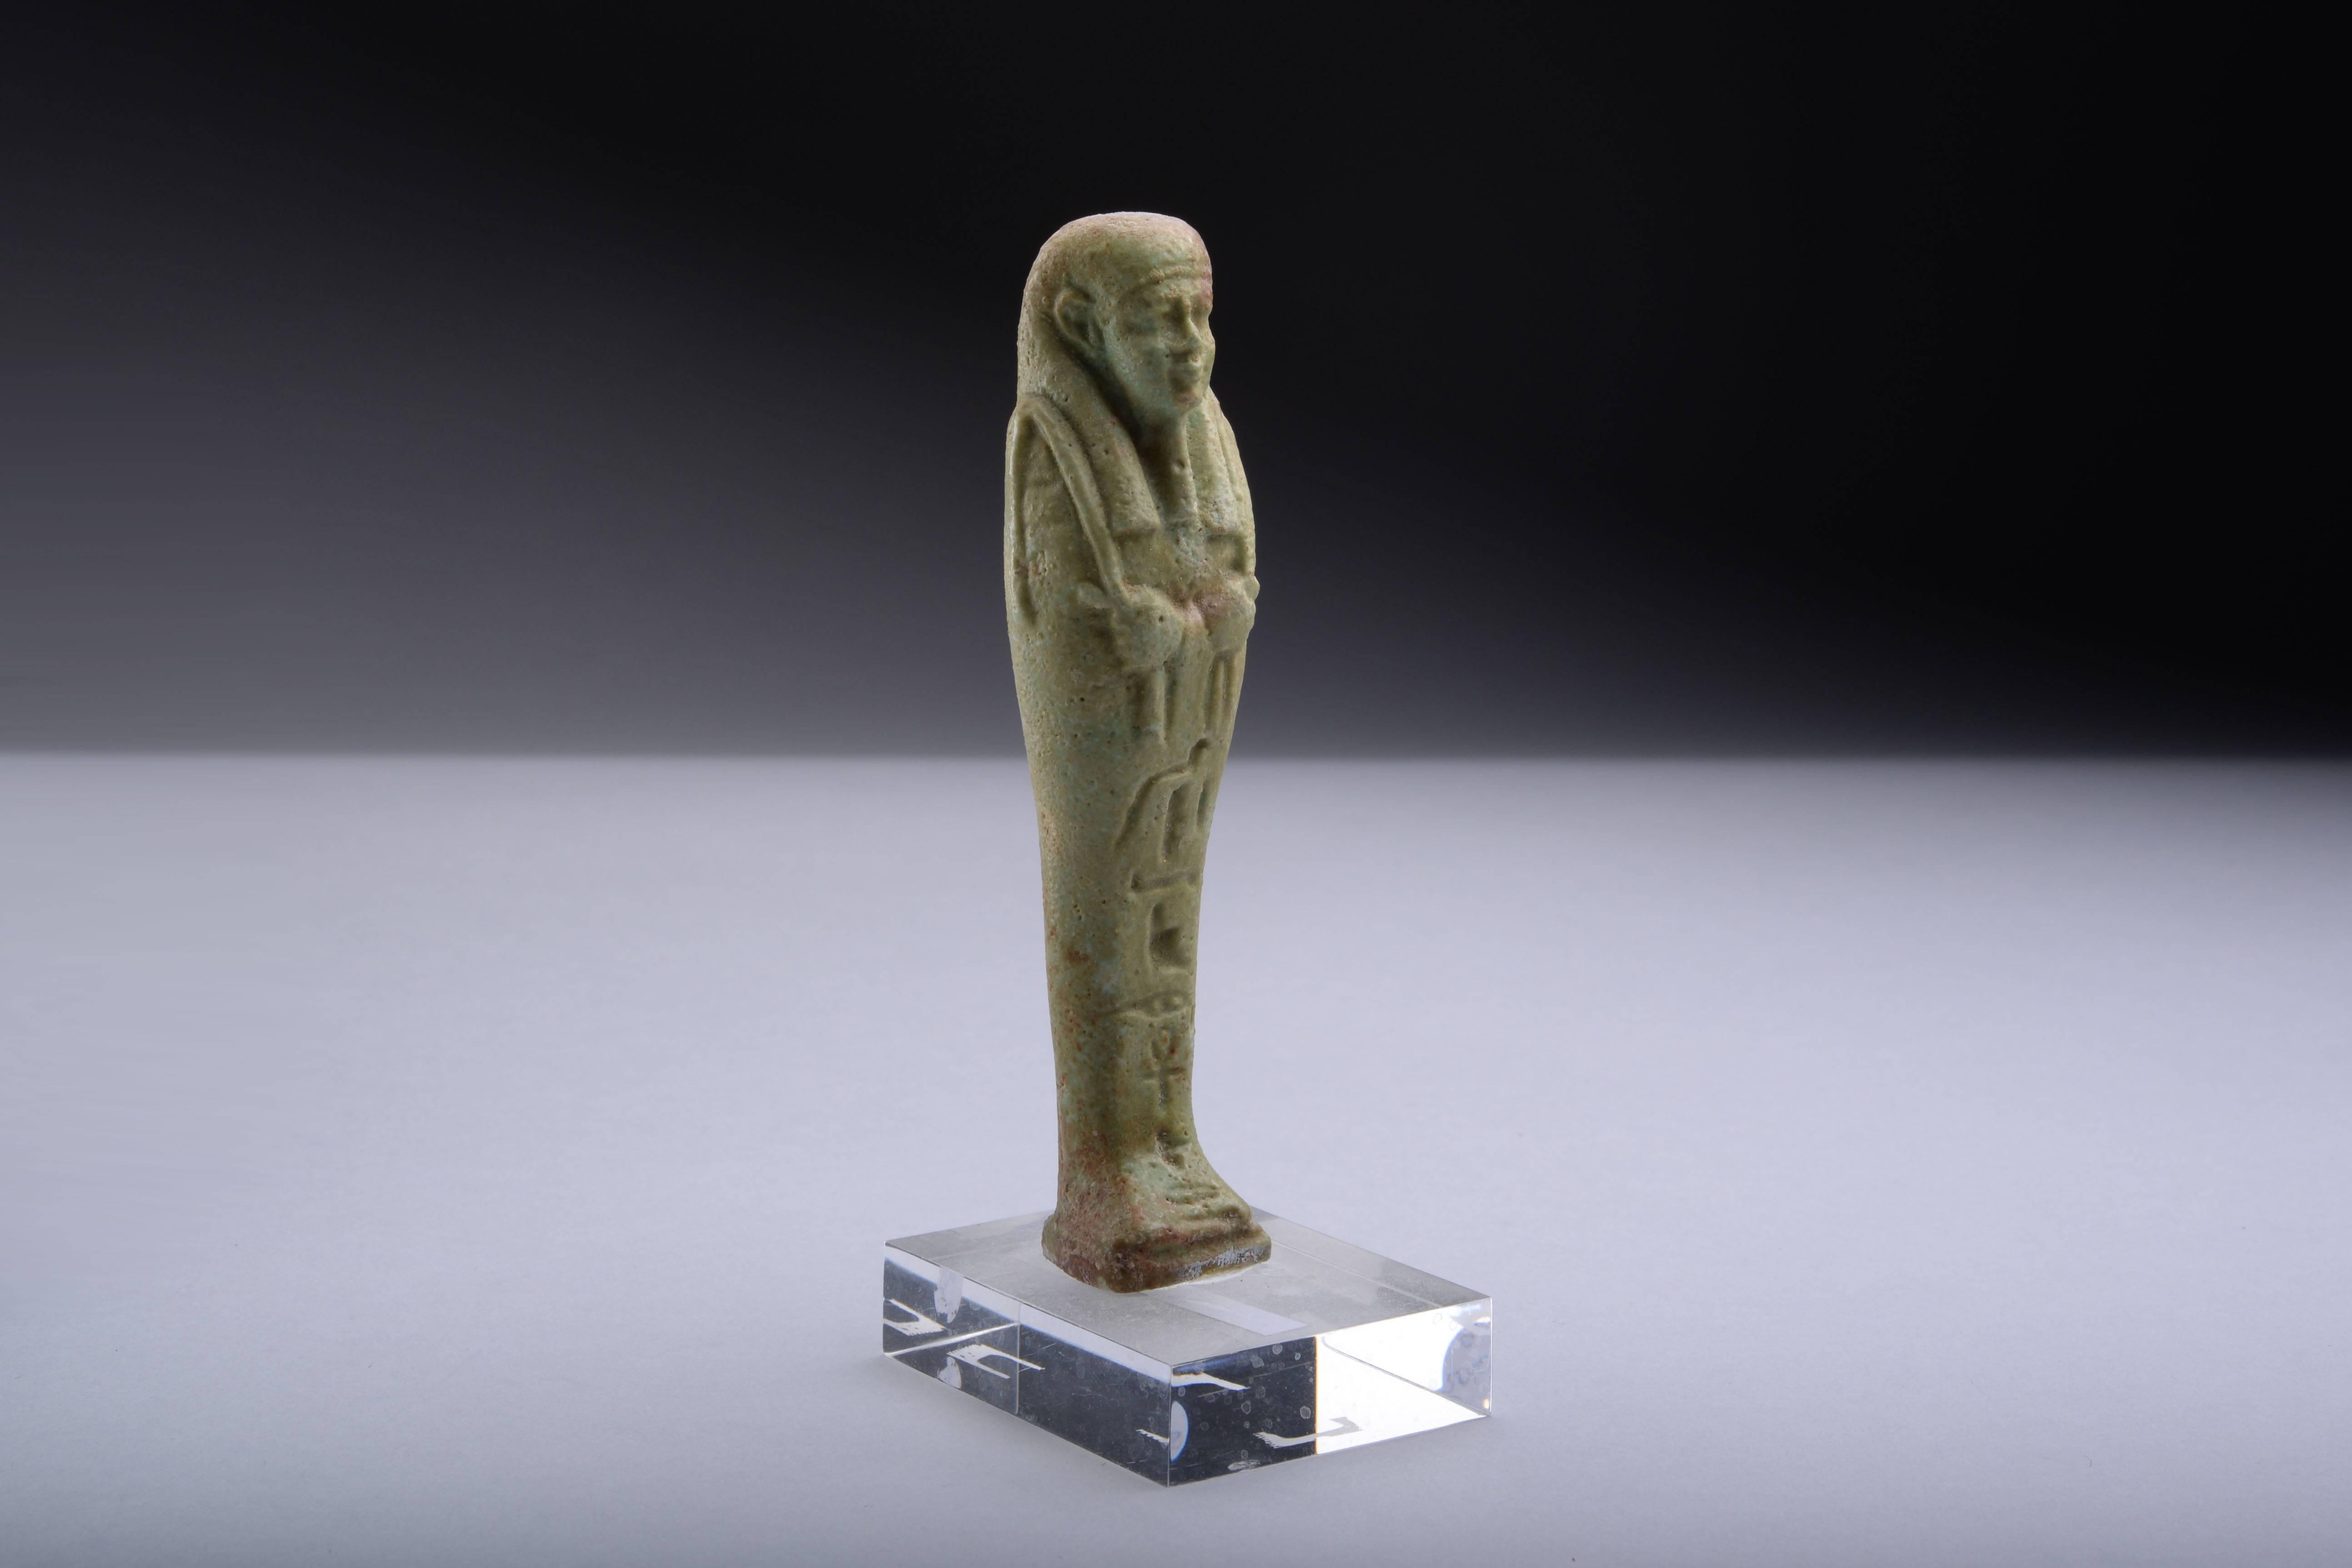 A quality, serene, ancient Egyptian faience shabti for Ankh-Her, dating to the Late Period, circa 664 - 332 BC.
 
The figure is depicted mummiform, with arms crossed holding two hoes, wearing tripartite wig and false beard, a vertical line of